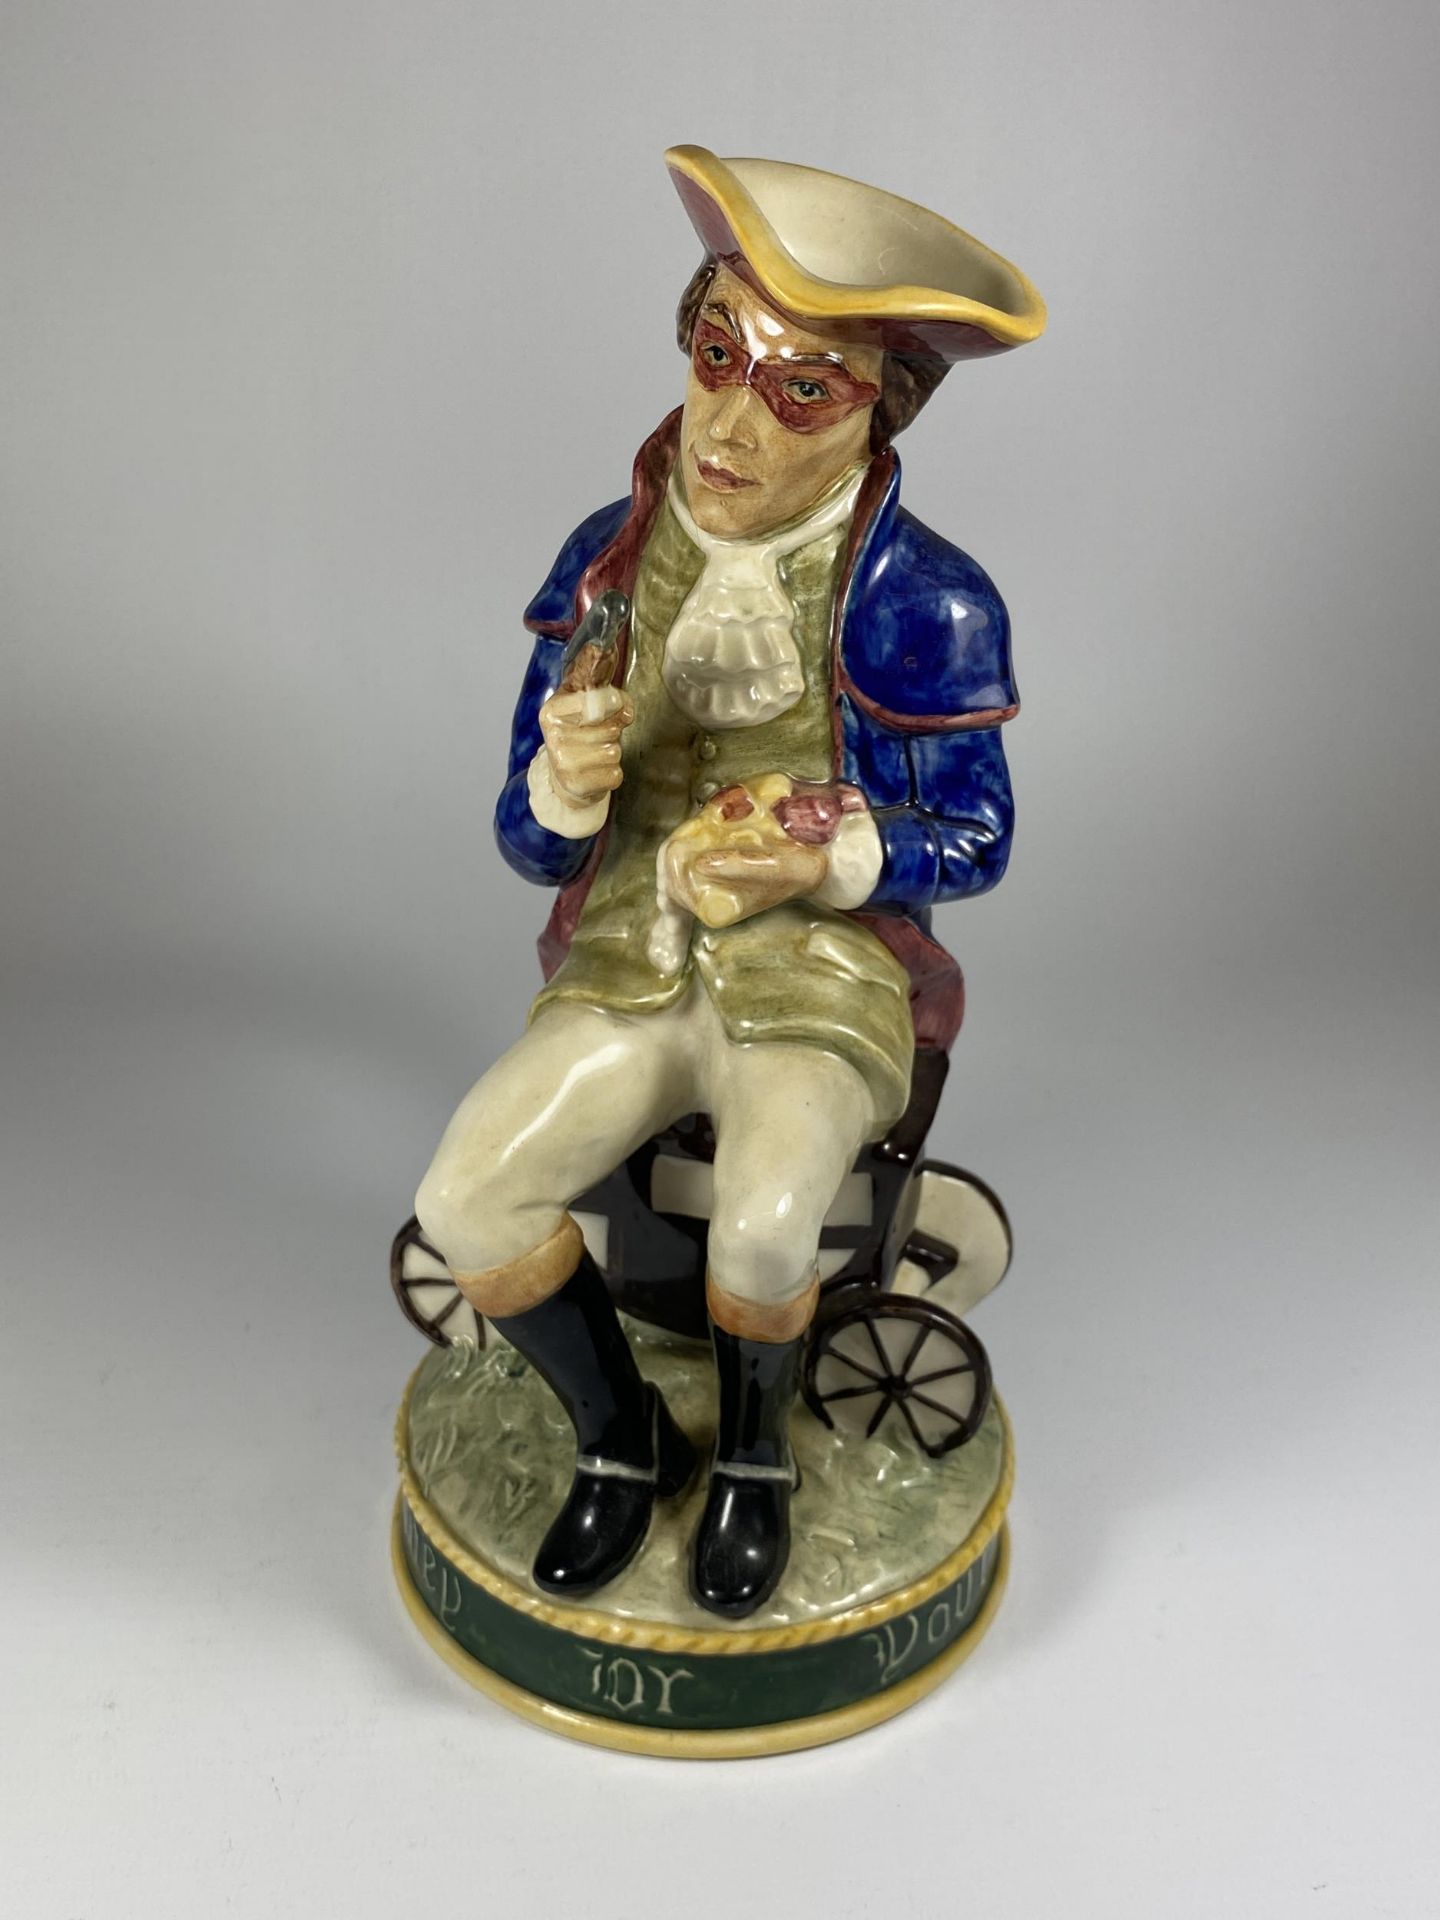 A LIMITED EDITION KEVIN FRANCIS DICK TURPIN TOBY JUG, NO. 89 OF 250